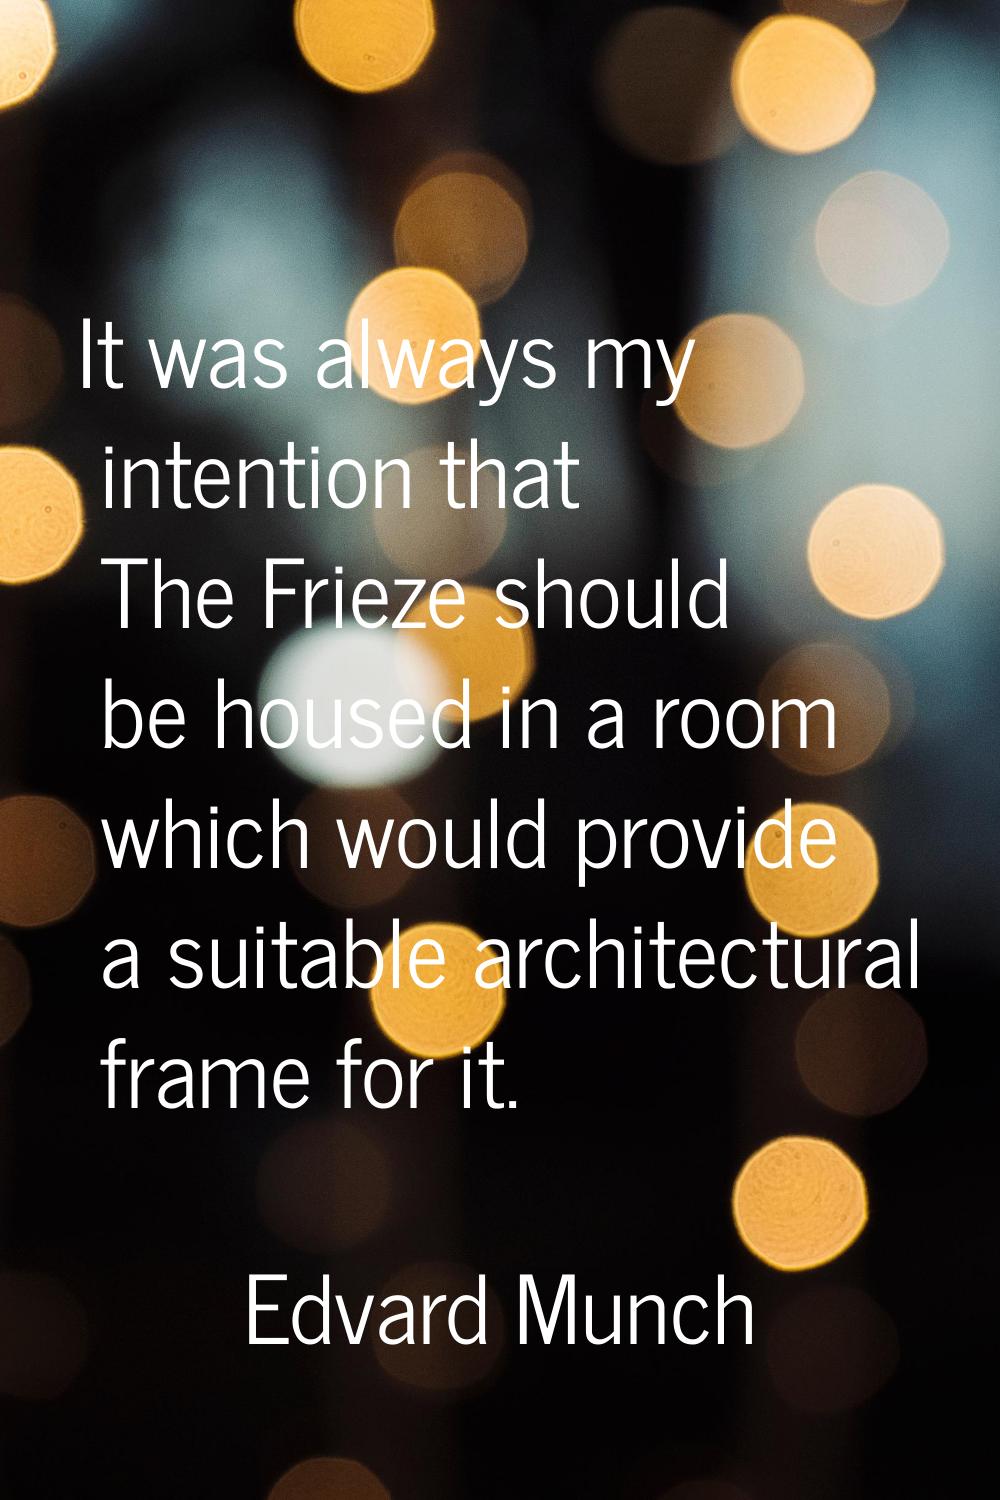 It was always my intention that The Frieze should be housed in a room which would provide a suitabl